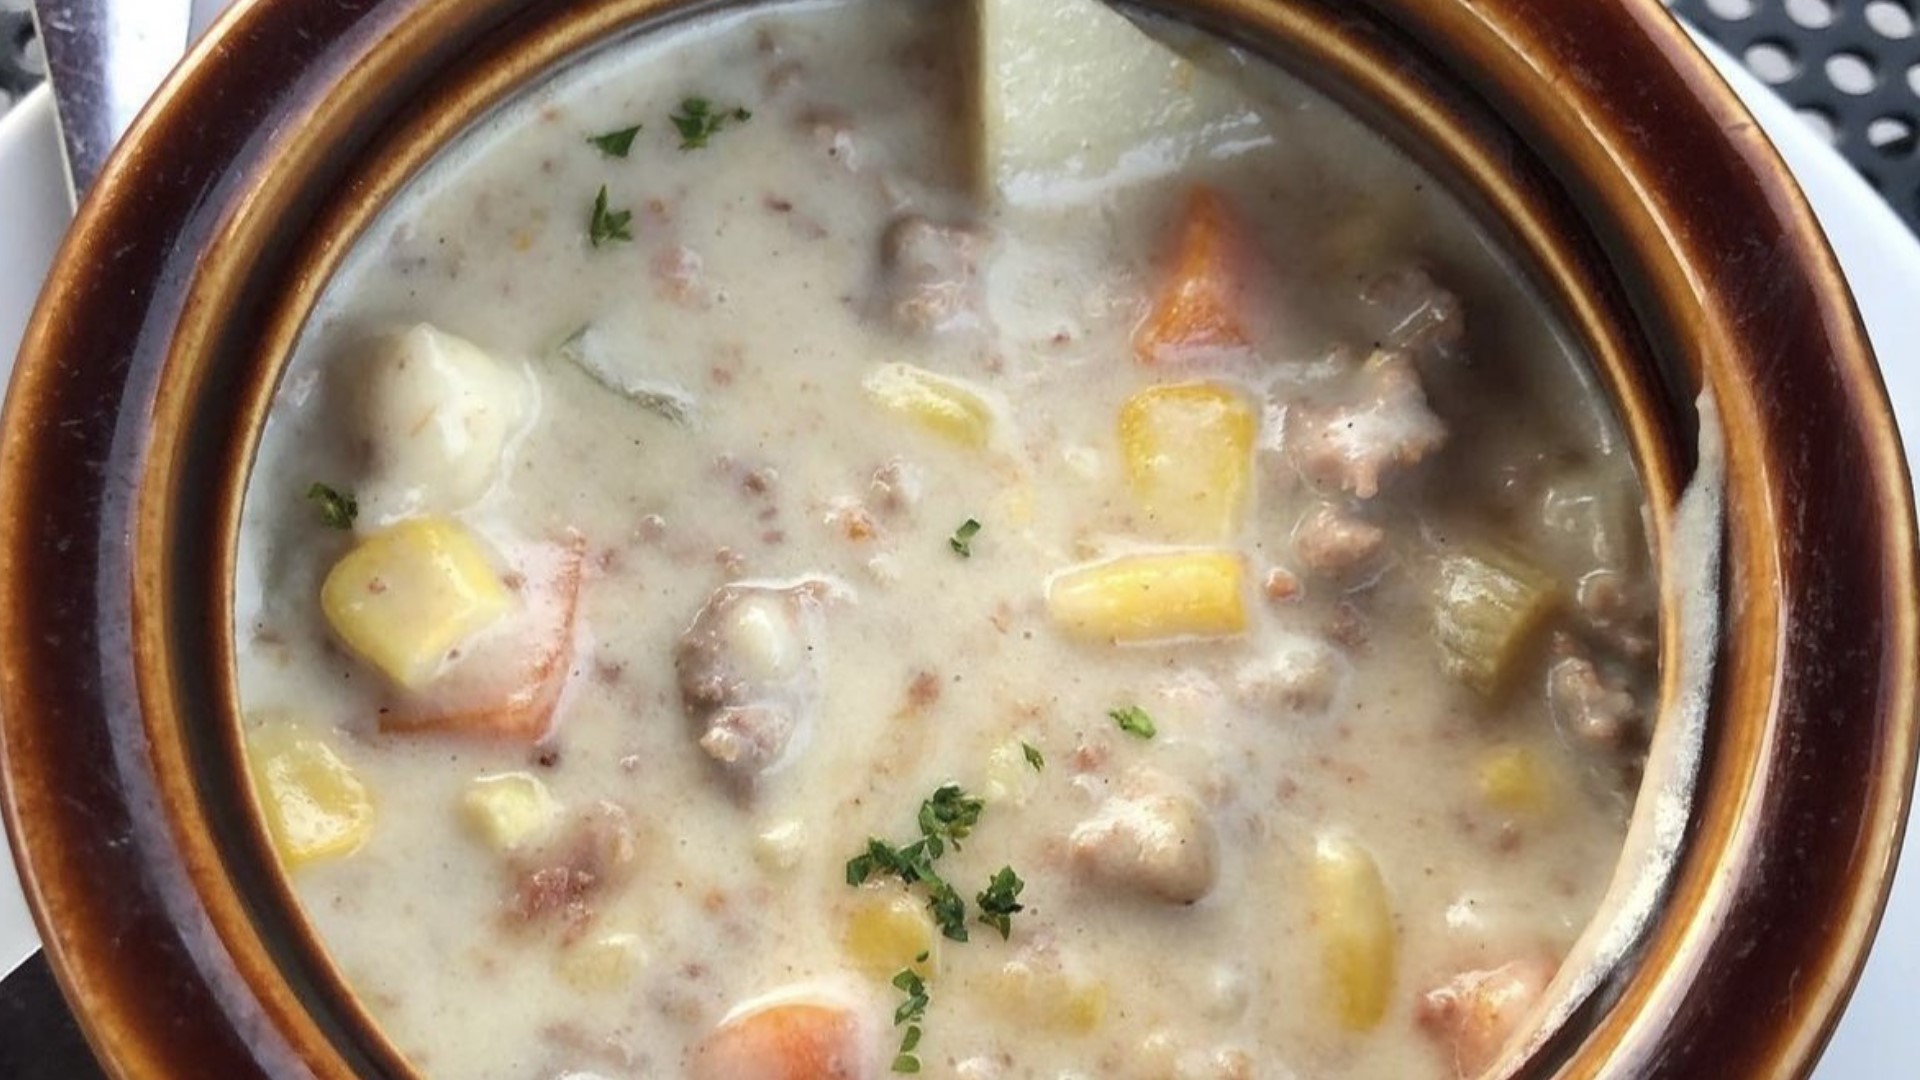 Wanna stay warm while it's cold outside? Chef Kevin Belton has a hearty and warming soup to fill you up.